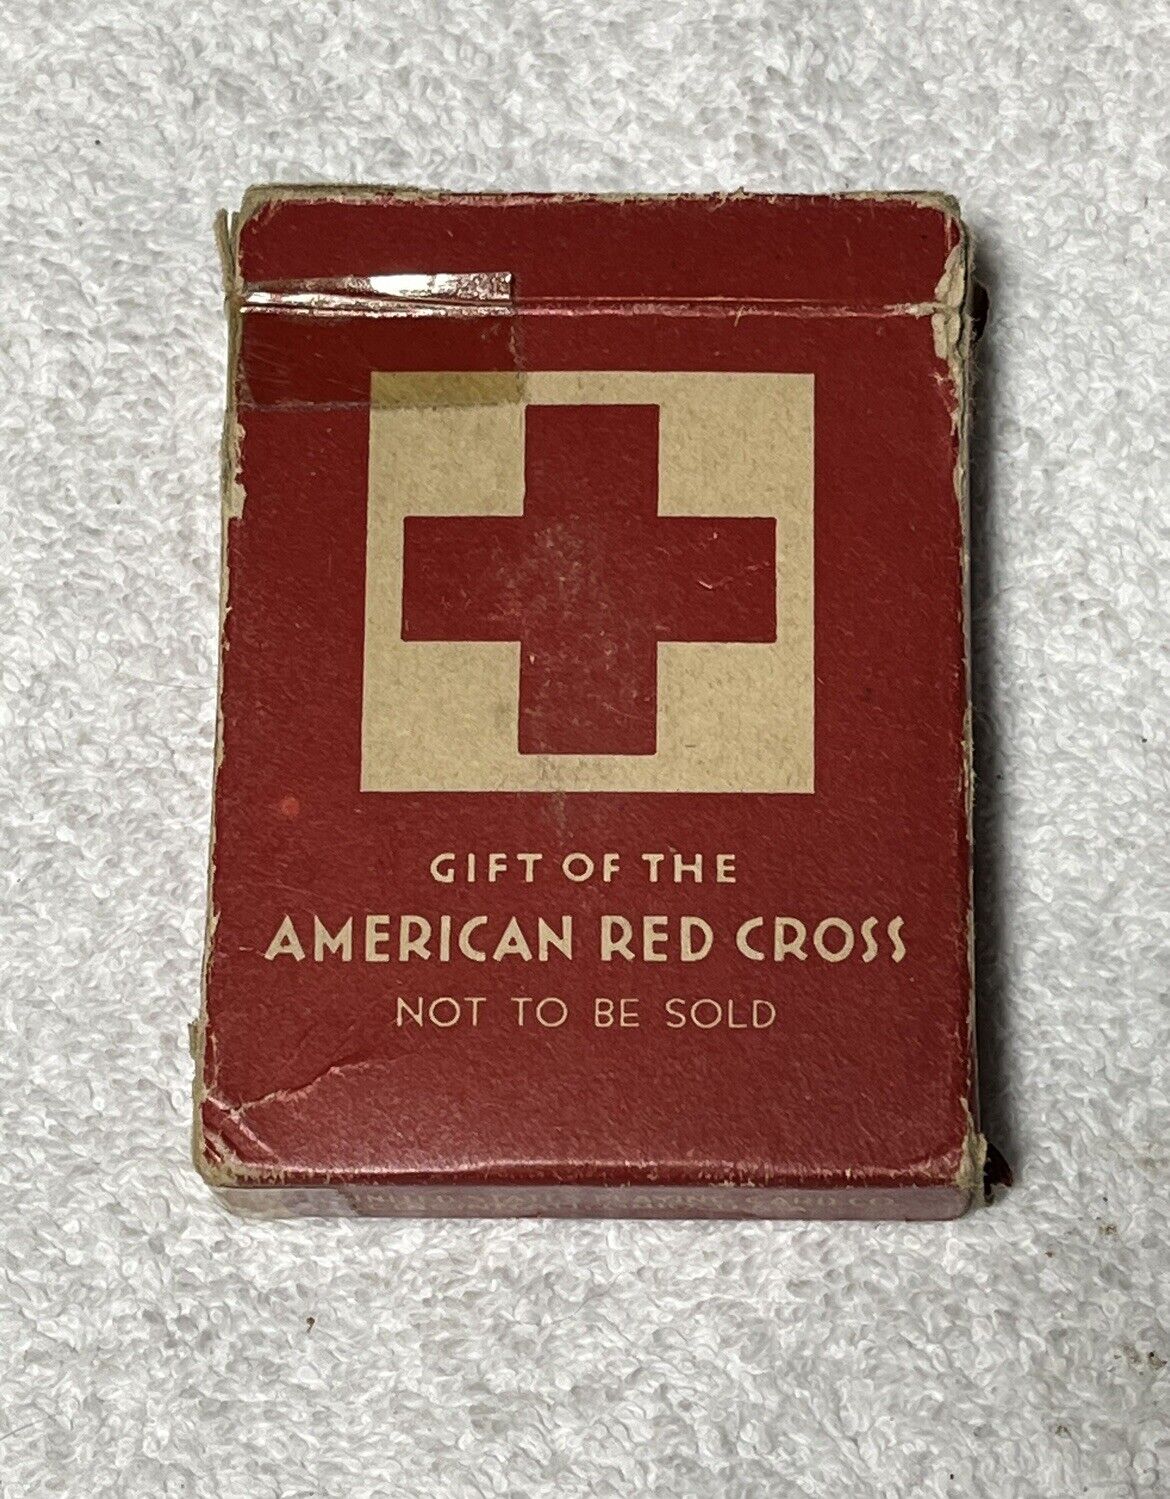 WWII Red Cross Pack of Playing Cards